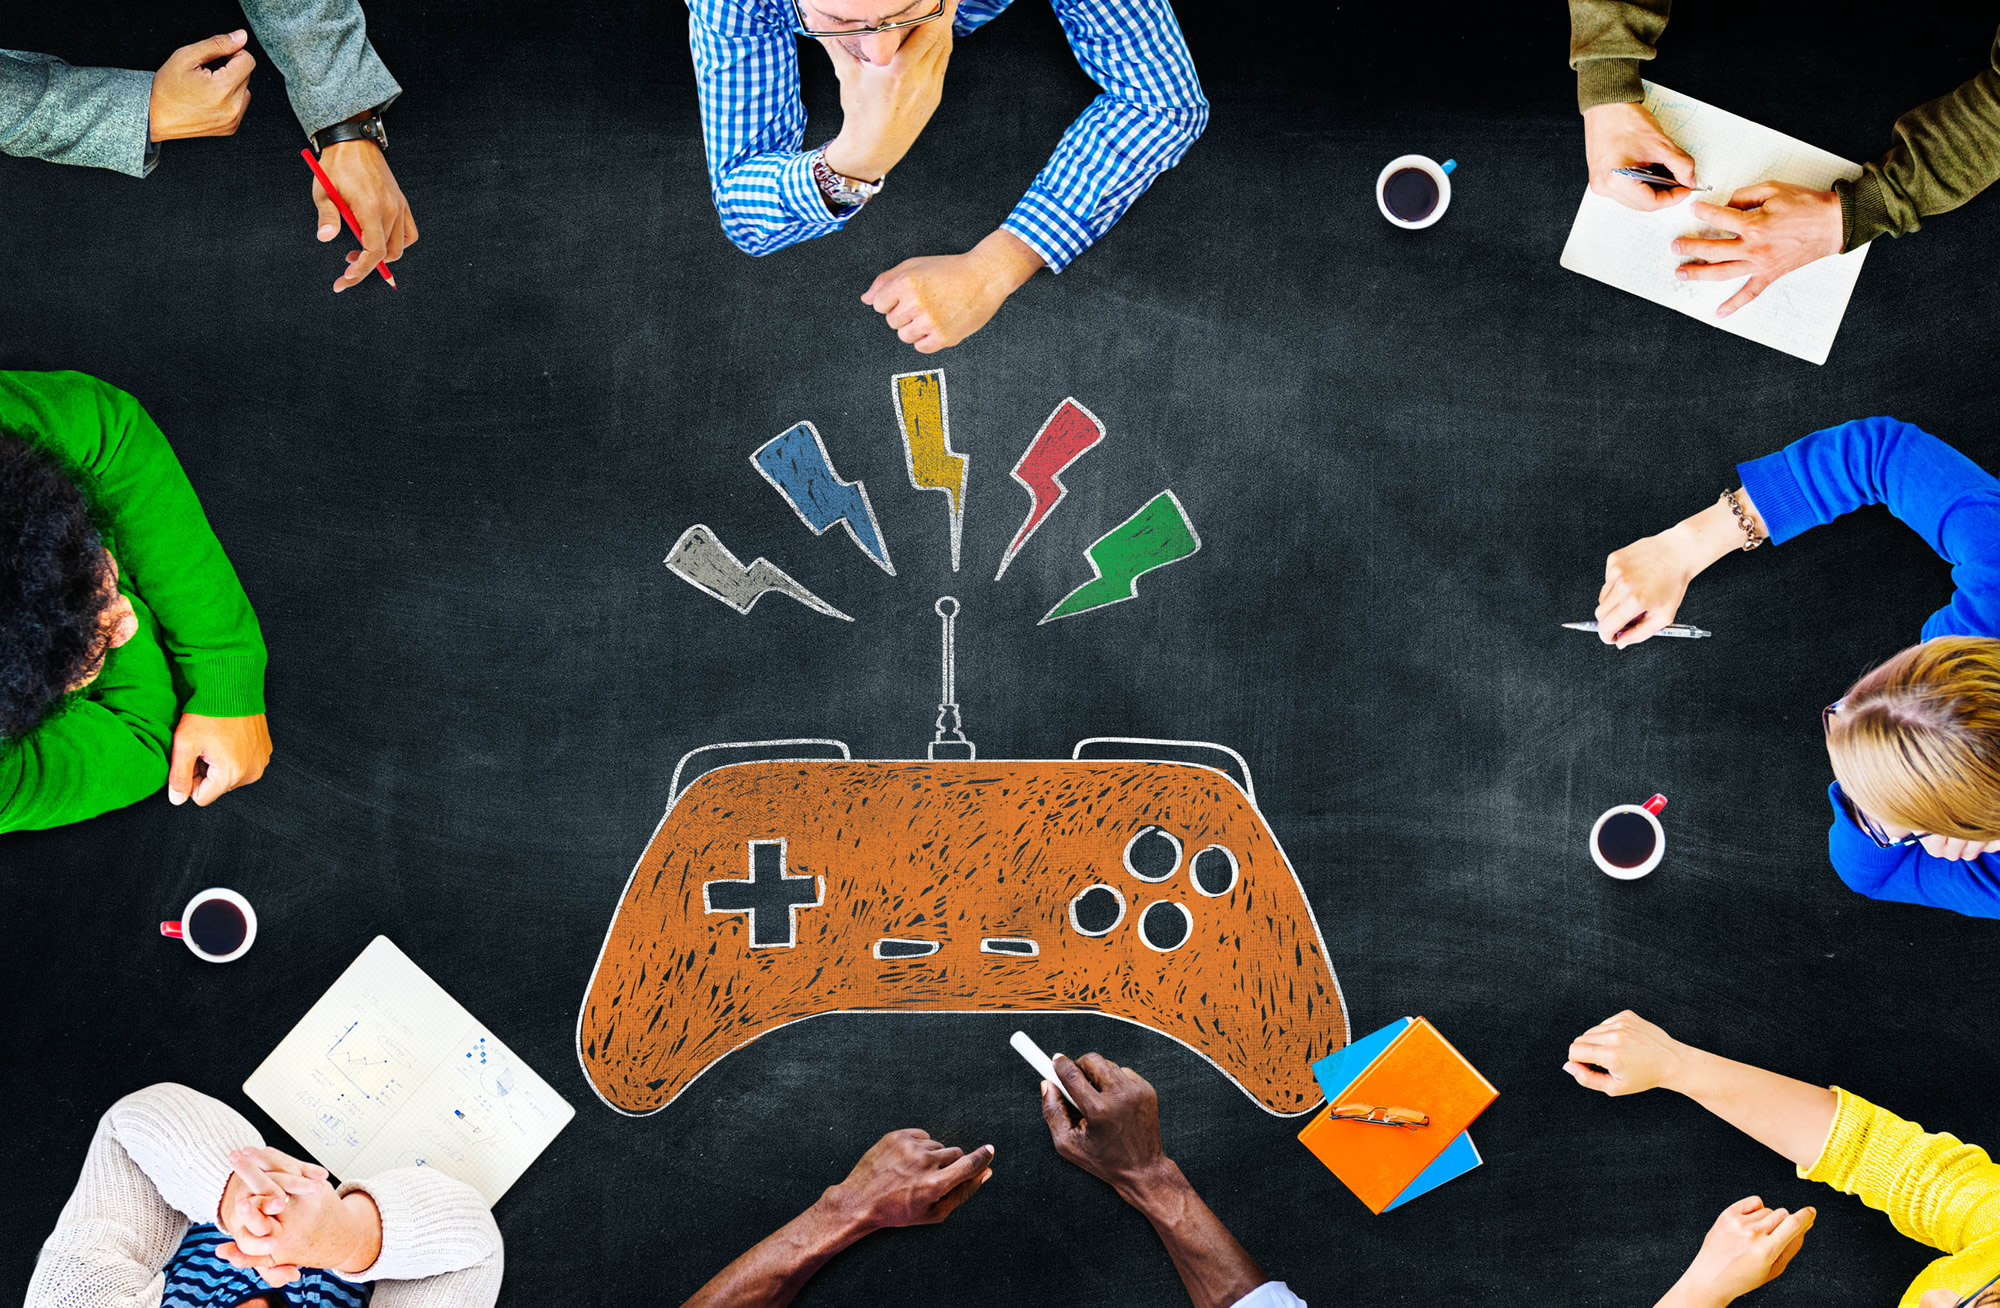 These 3 game-based components can increase student achievement